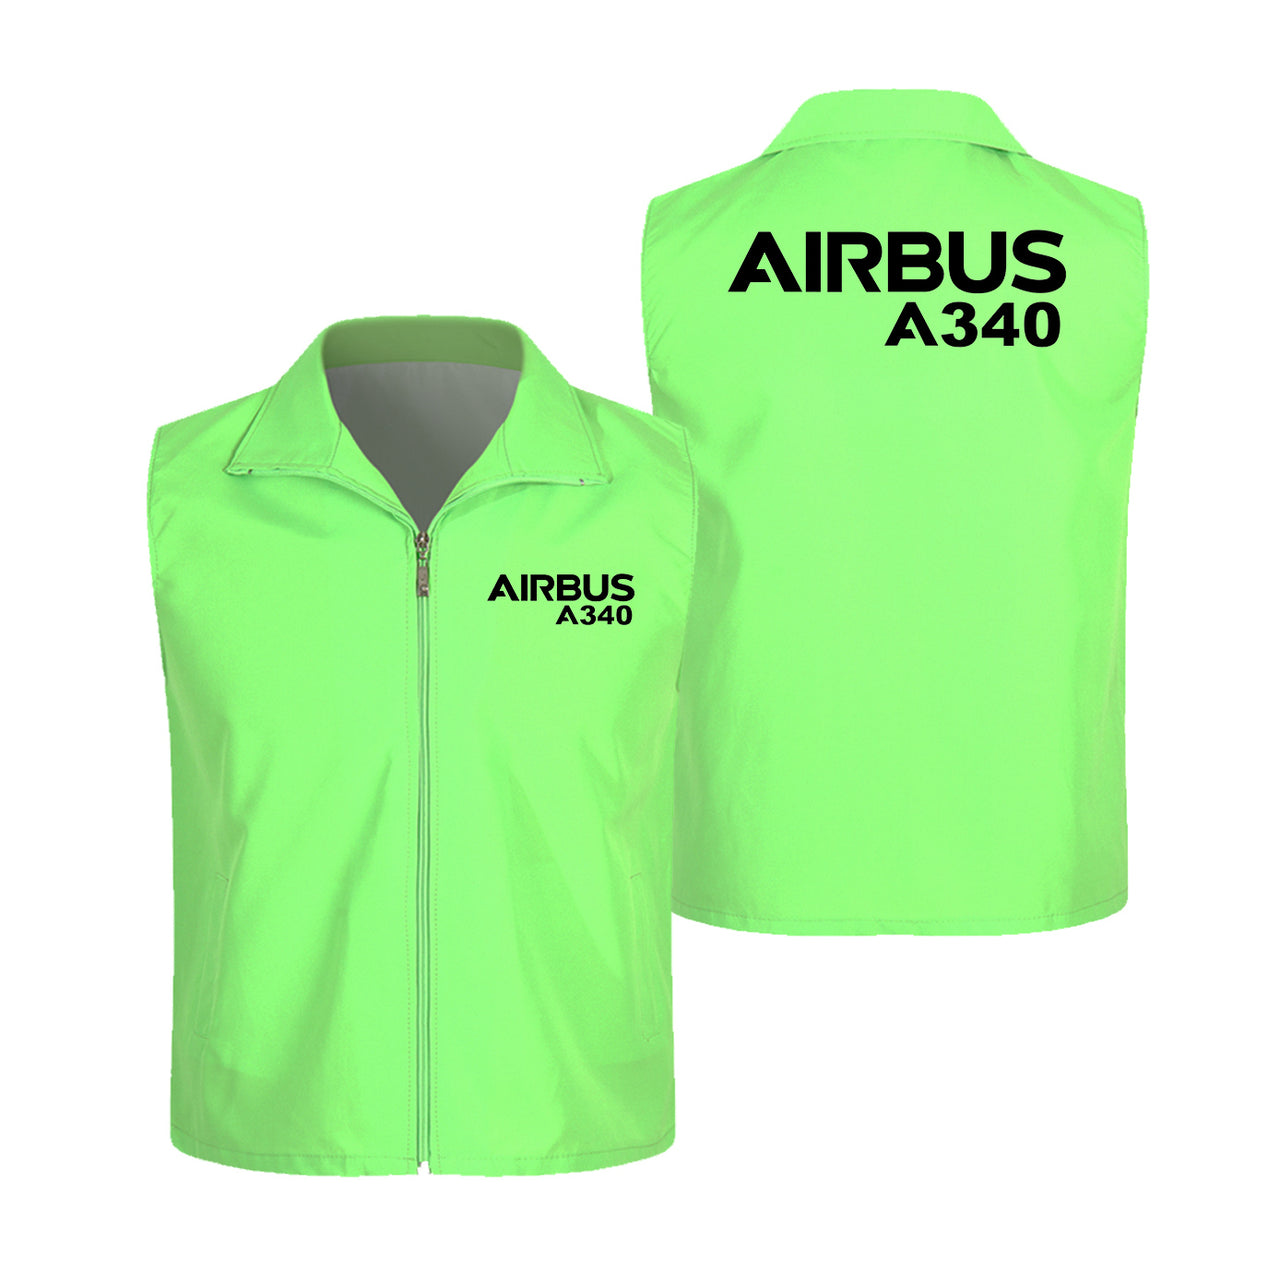 Airbus A340 & Text Designed Thin Style Vests